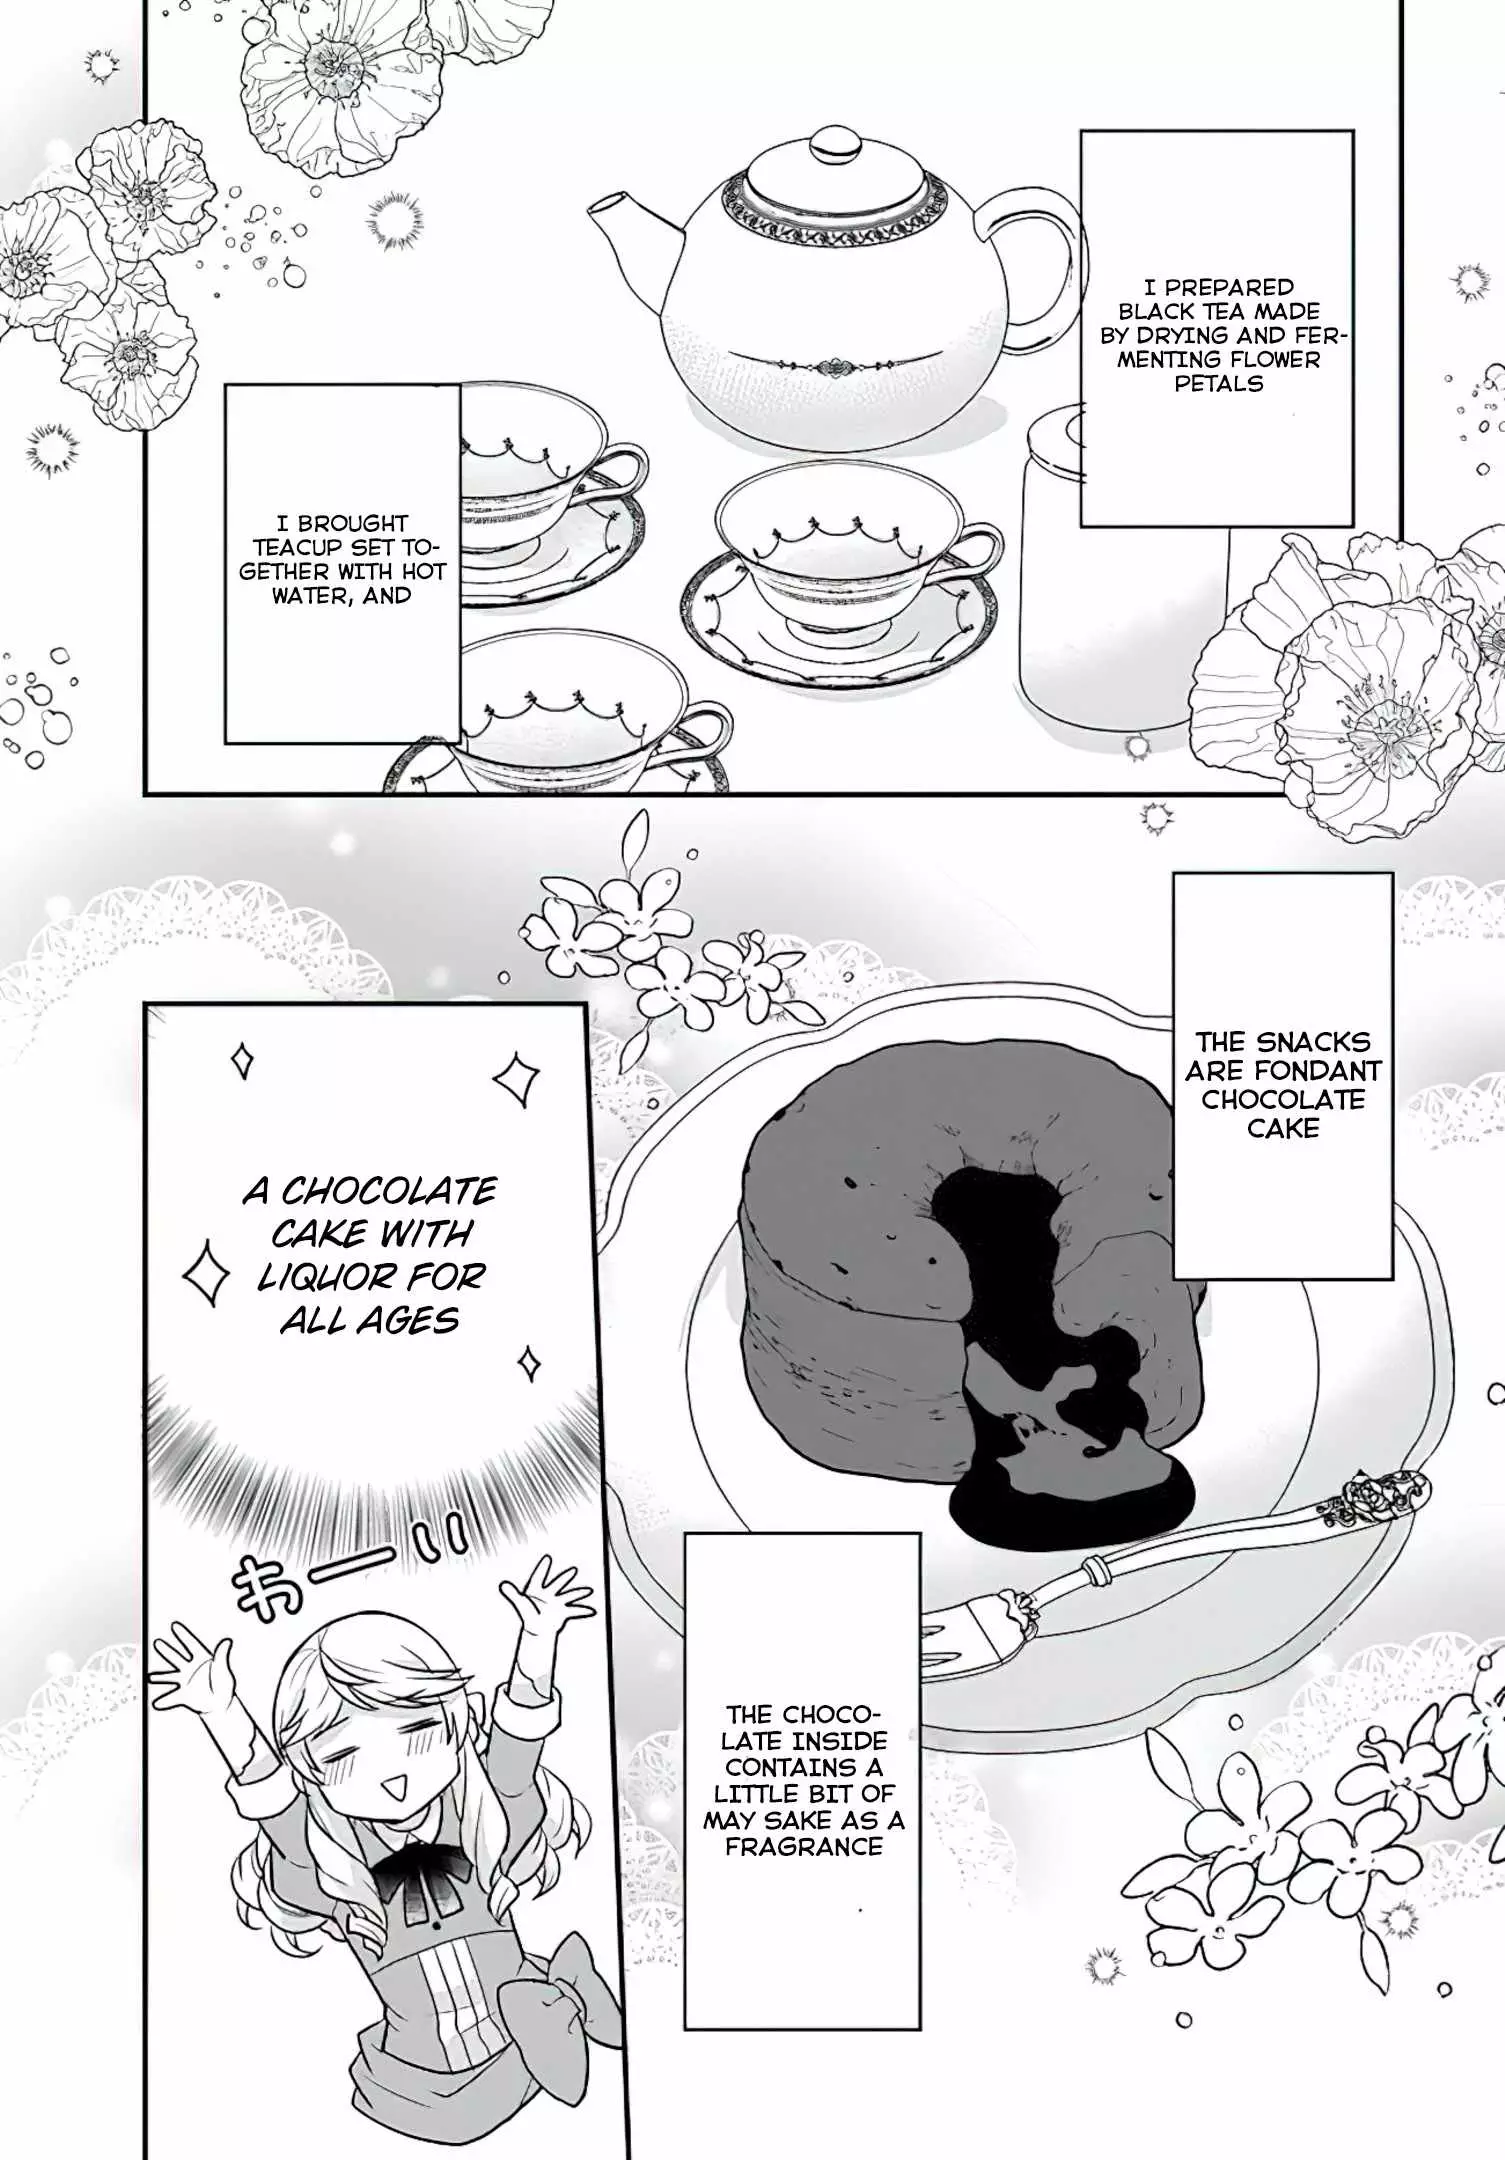 Because Of Her Love For Sake, The Otome Game Setting Was Broken And The Villainous Noblewoman Became The Noblewoman With Cheats - 22 page 12-3477f9fa